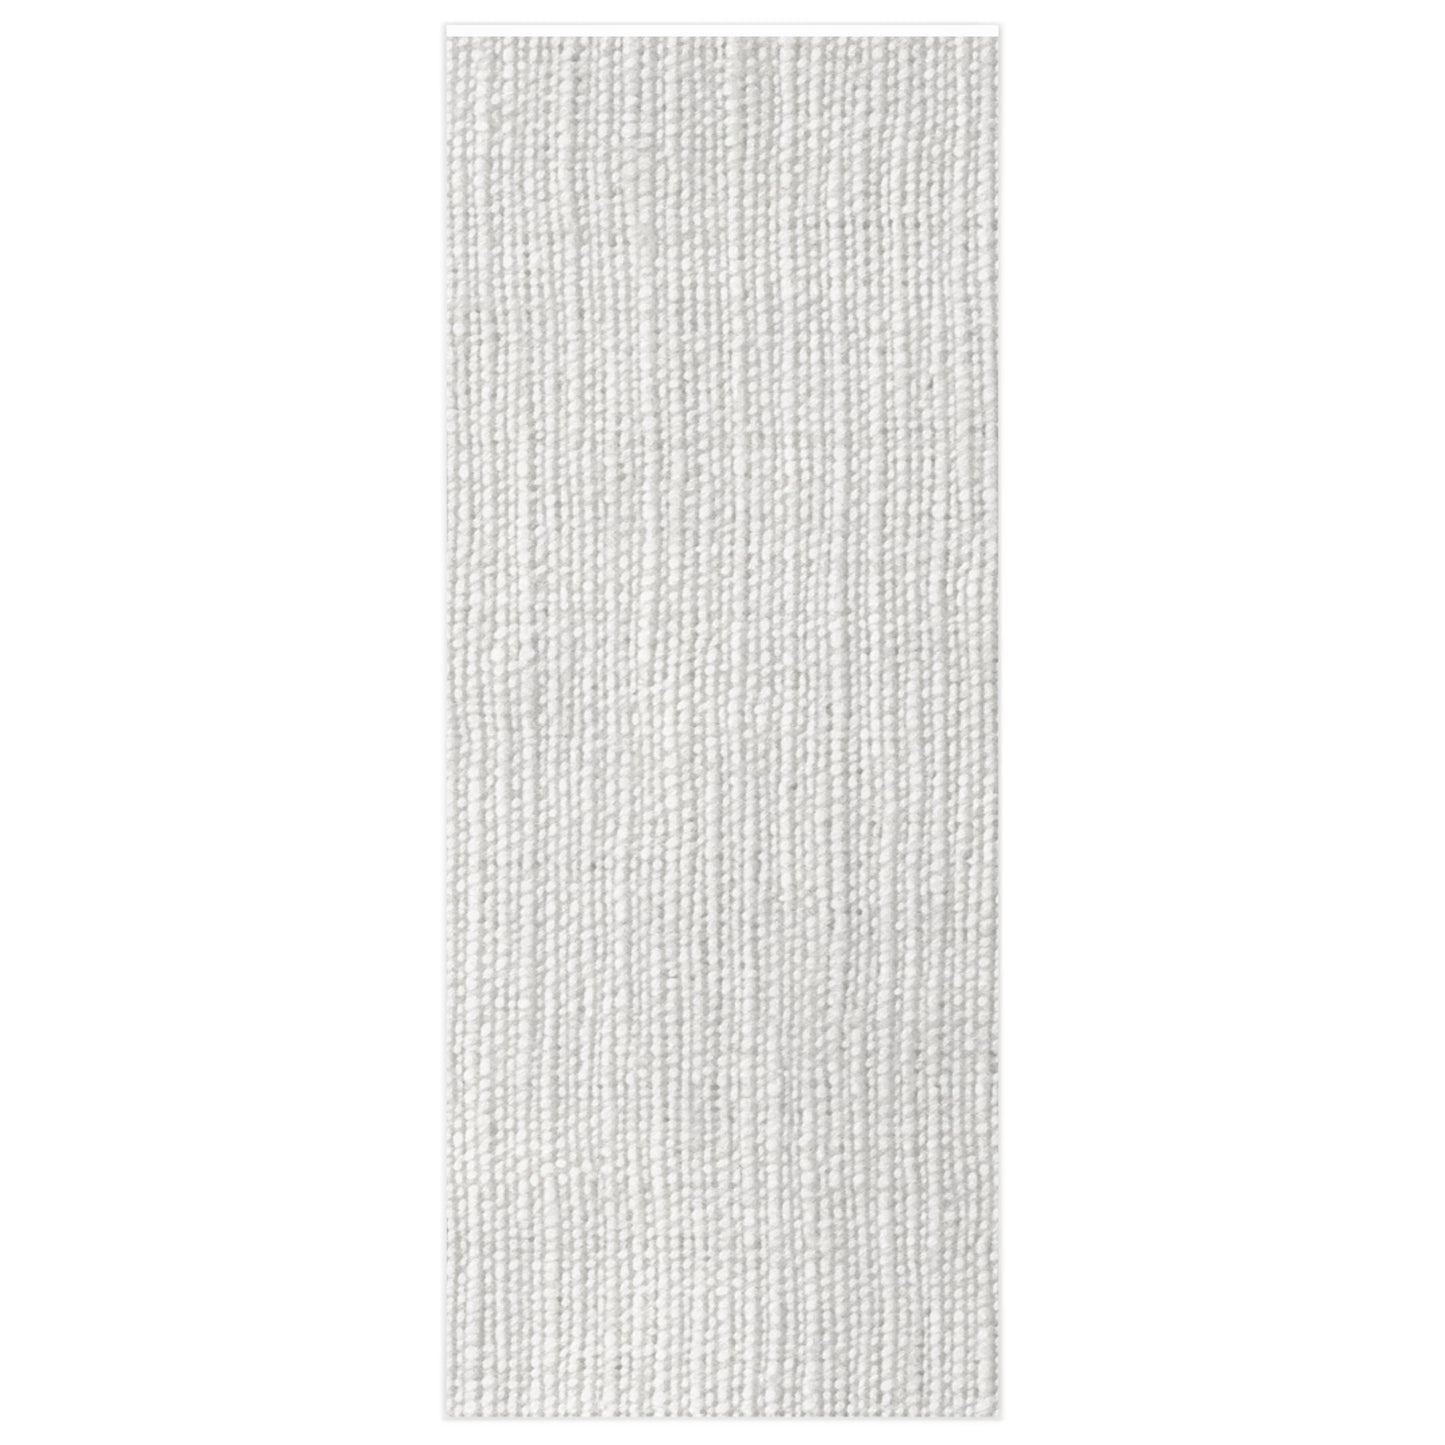 Chic White Denim-Style Fabric, Luxurious & Stylish Material - Wrapping Paper